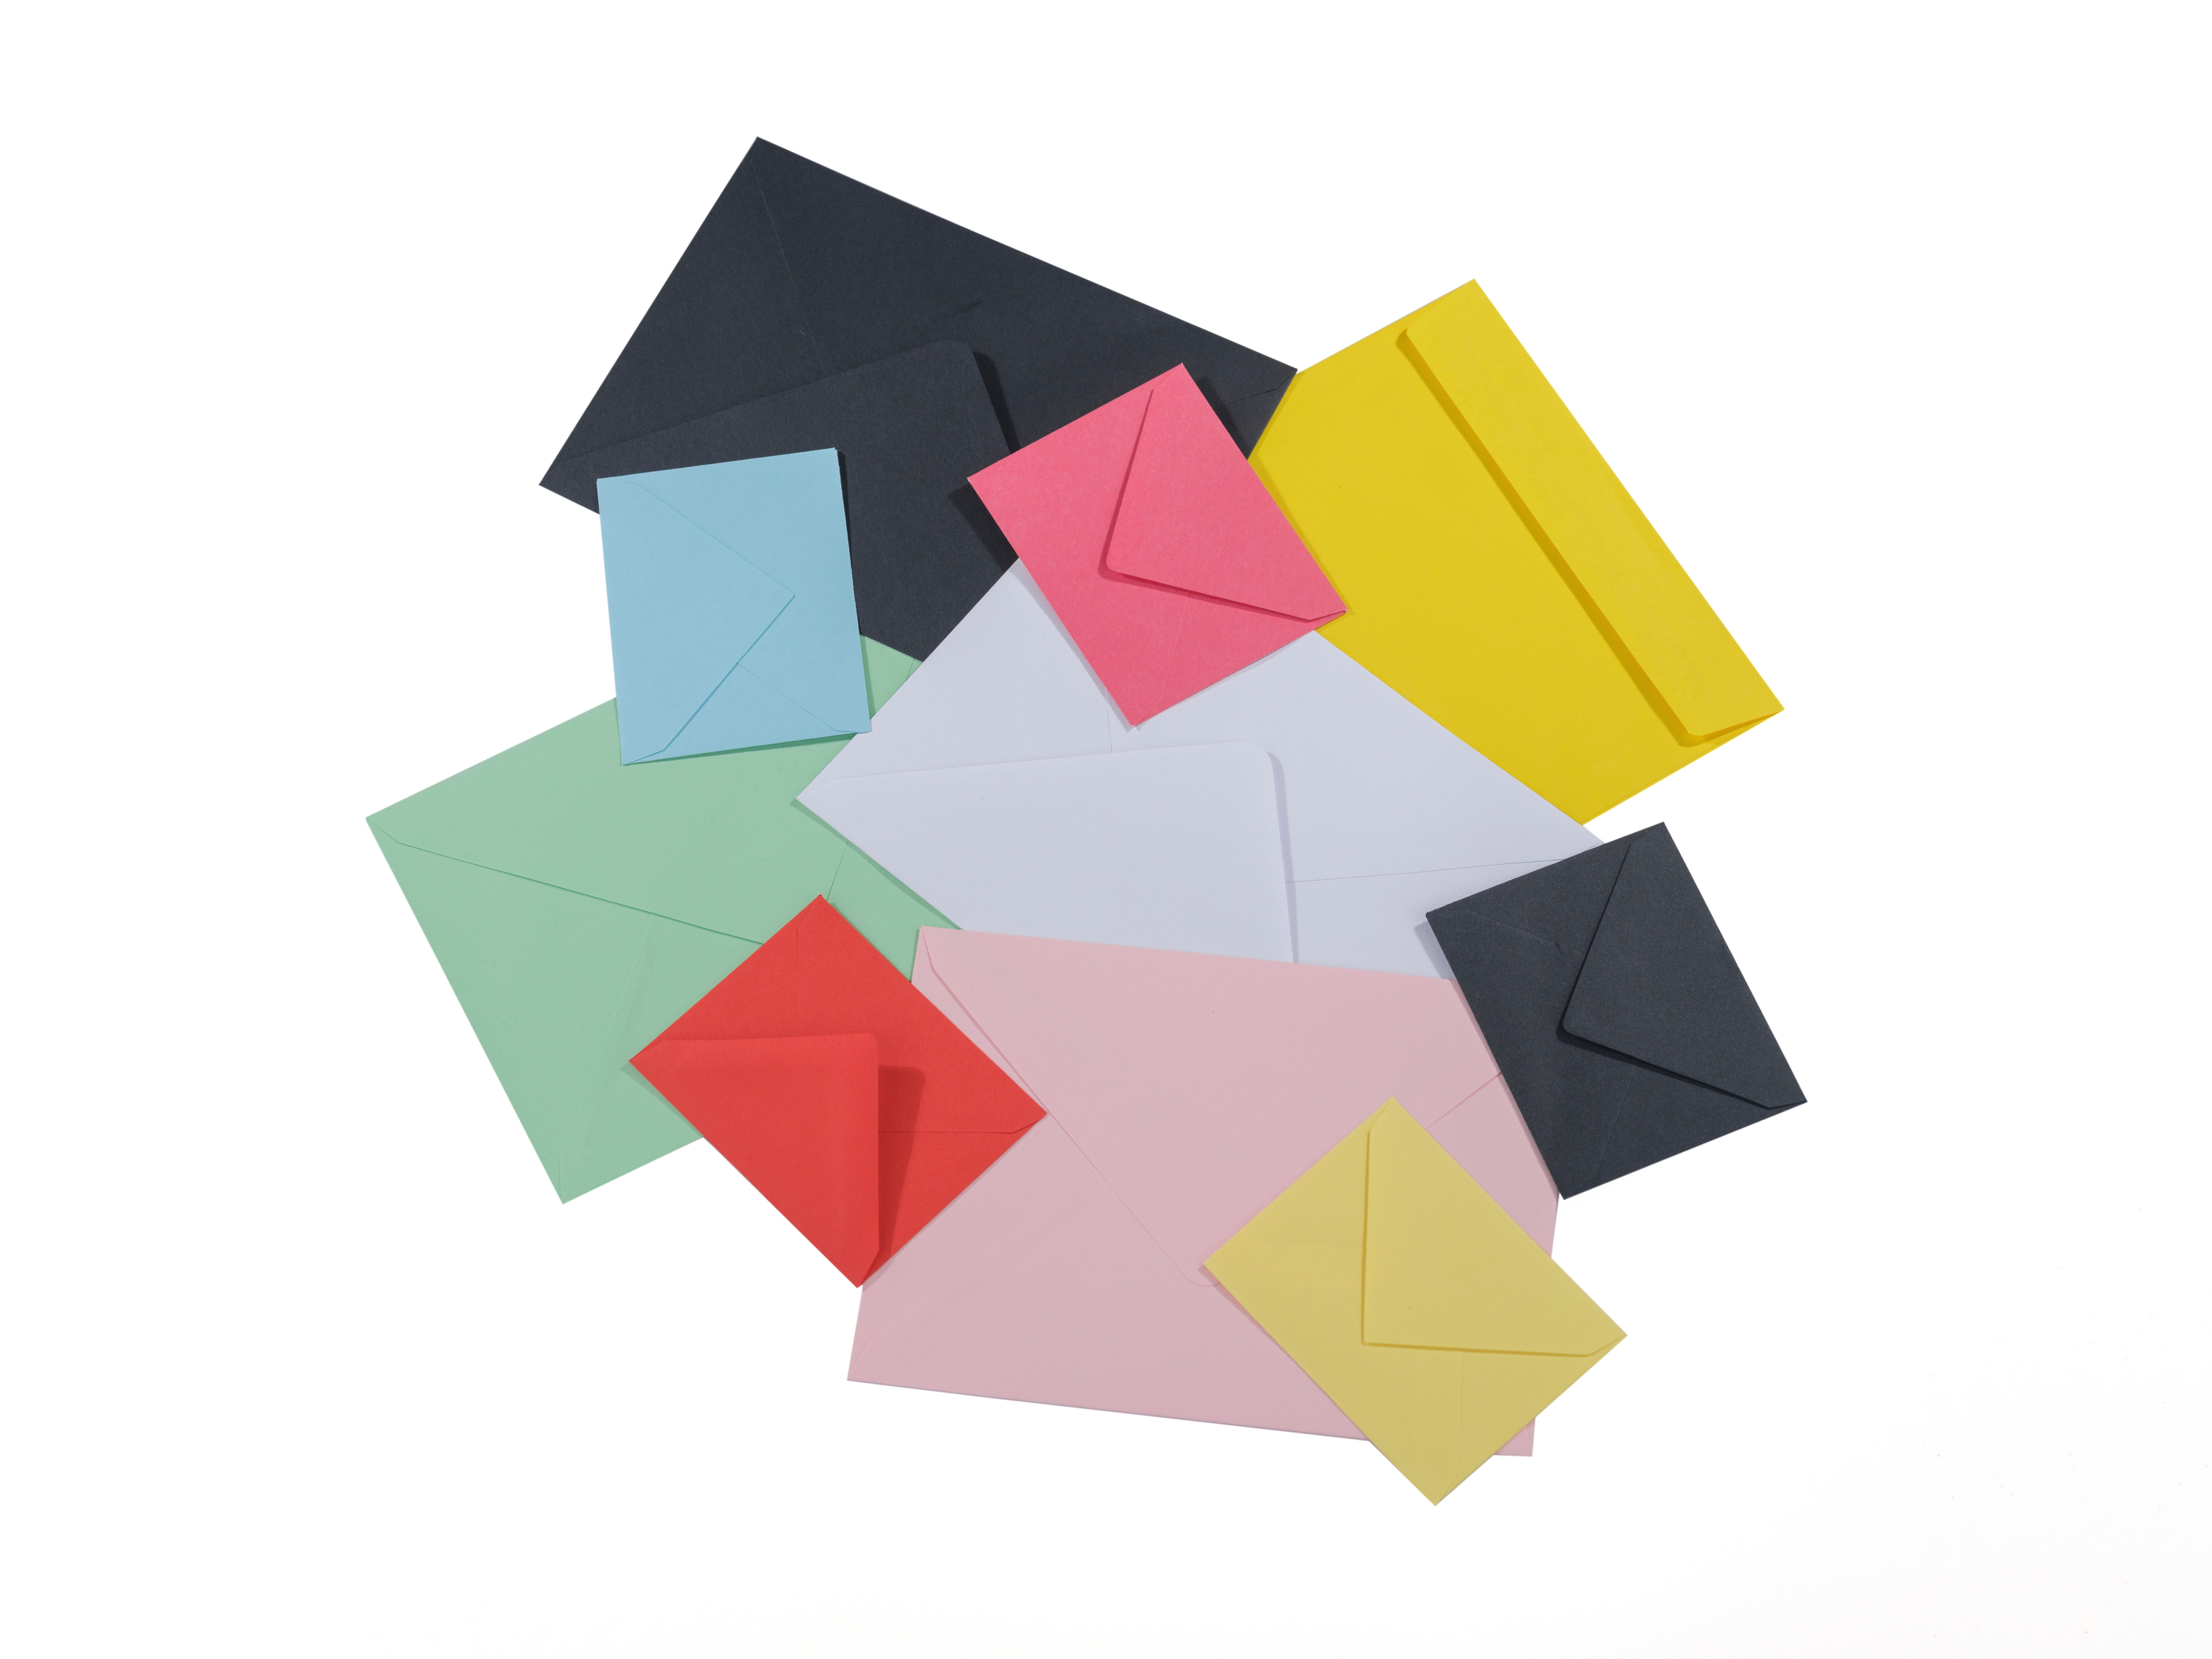 Image of a pile of envelops used for direct mail marketing roi